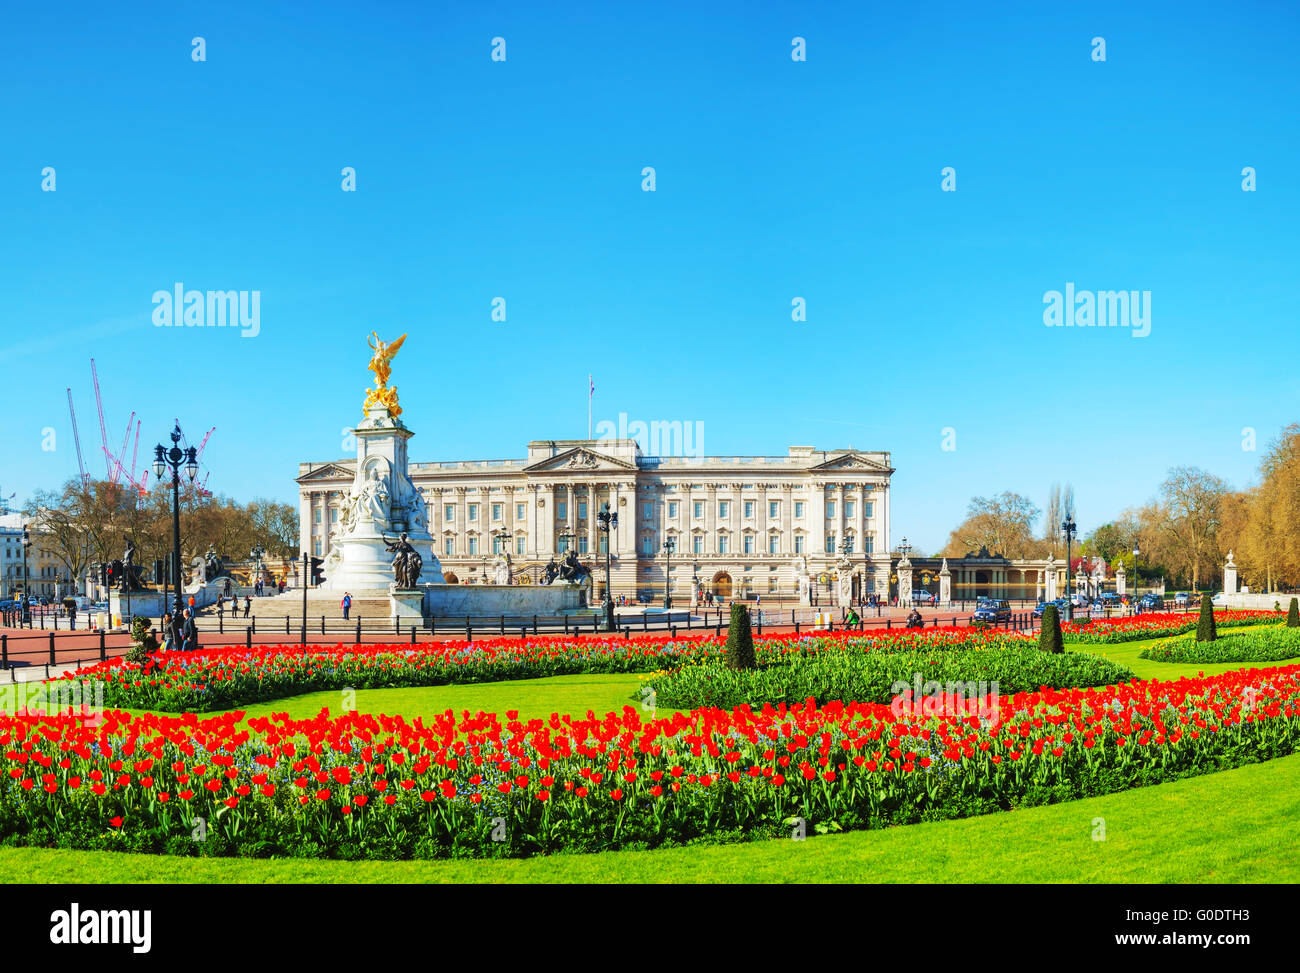 Buckingham palace panoramic overview in London, UK Stock Photo